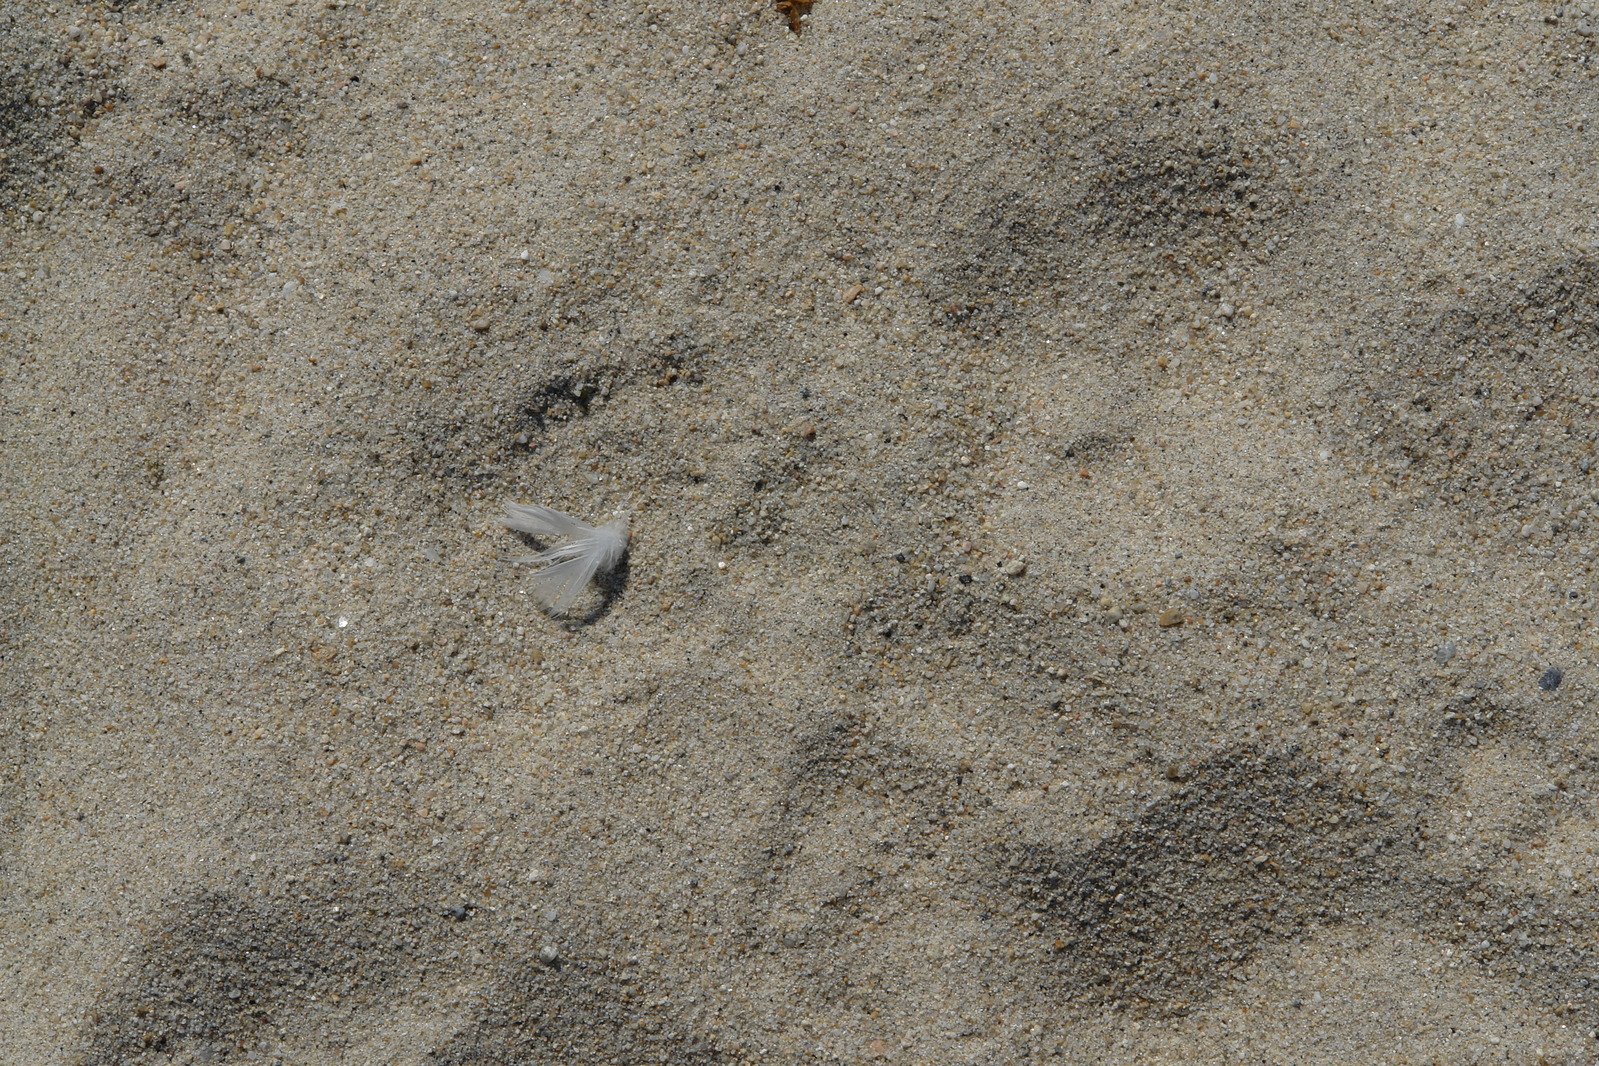 an animal's paw prints are seen on the sand